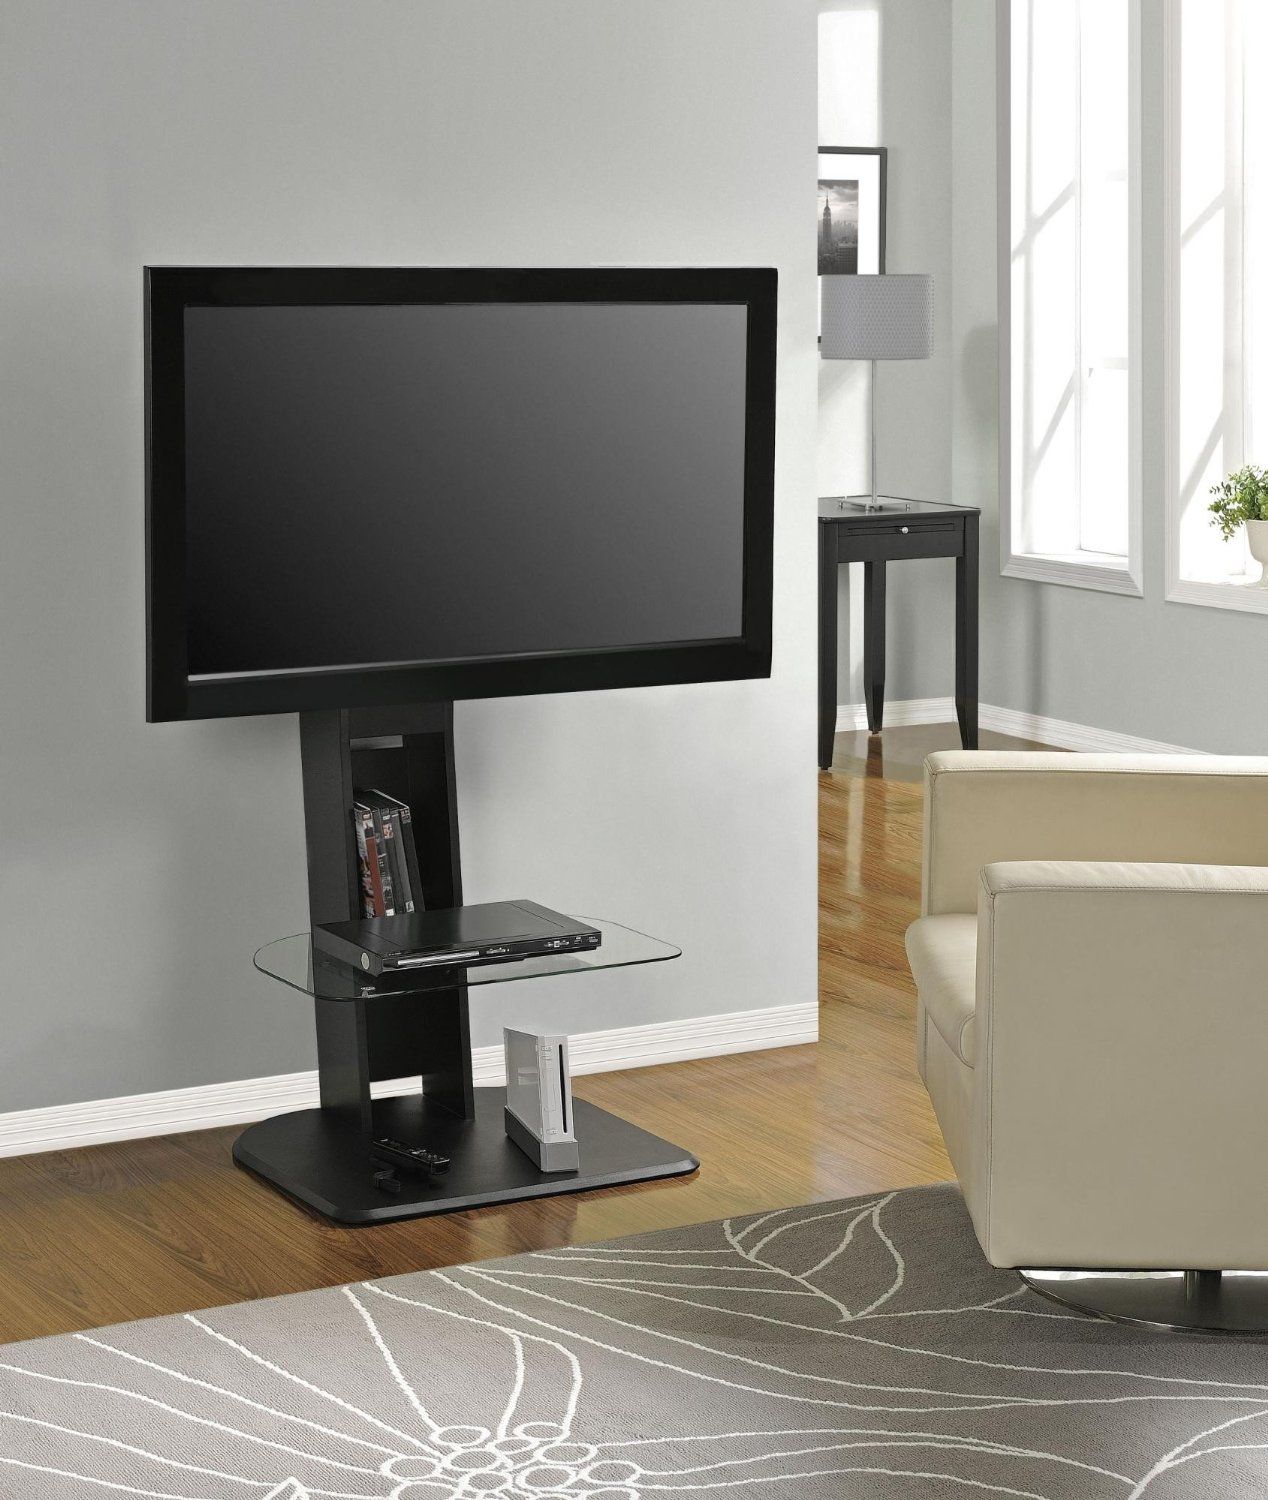 Cool Flat Screen Tv Stands With Mount | Homesfeed Within Stand For Flat Screen (View 11 of 20)